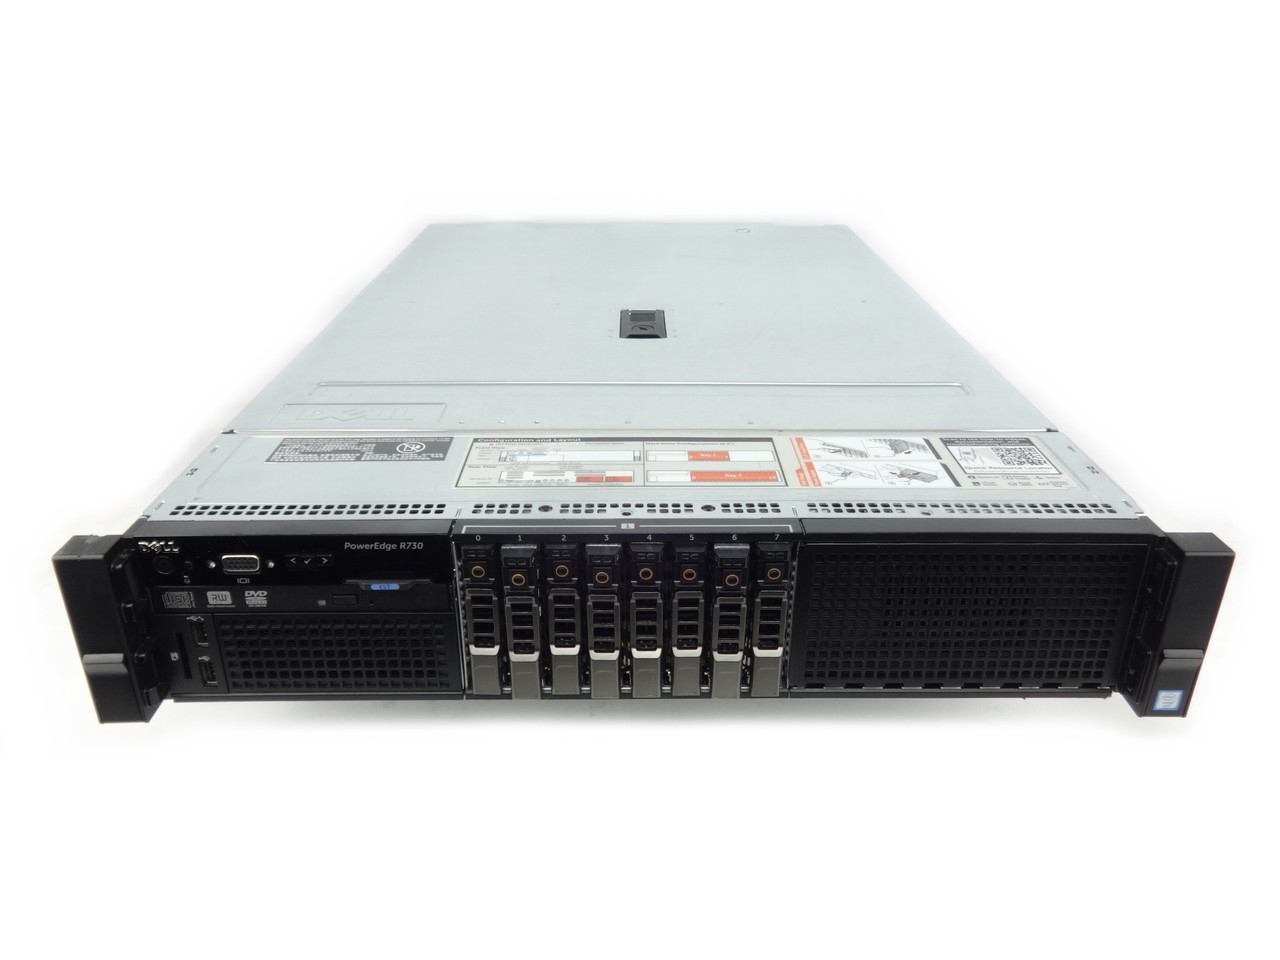 Dell Poweredge R730 8x 2.5" Server Build to Order